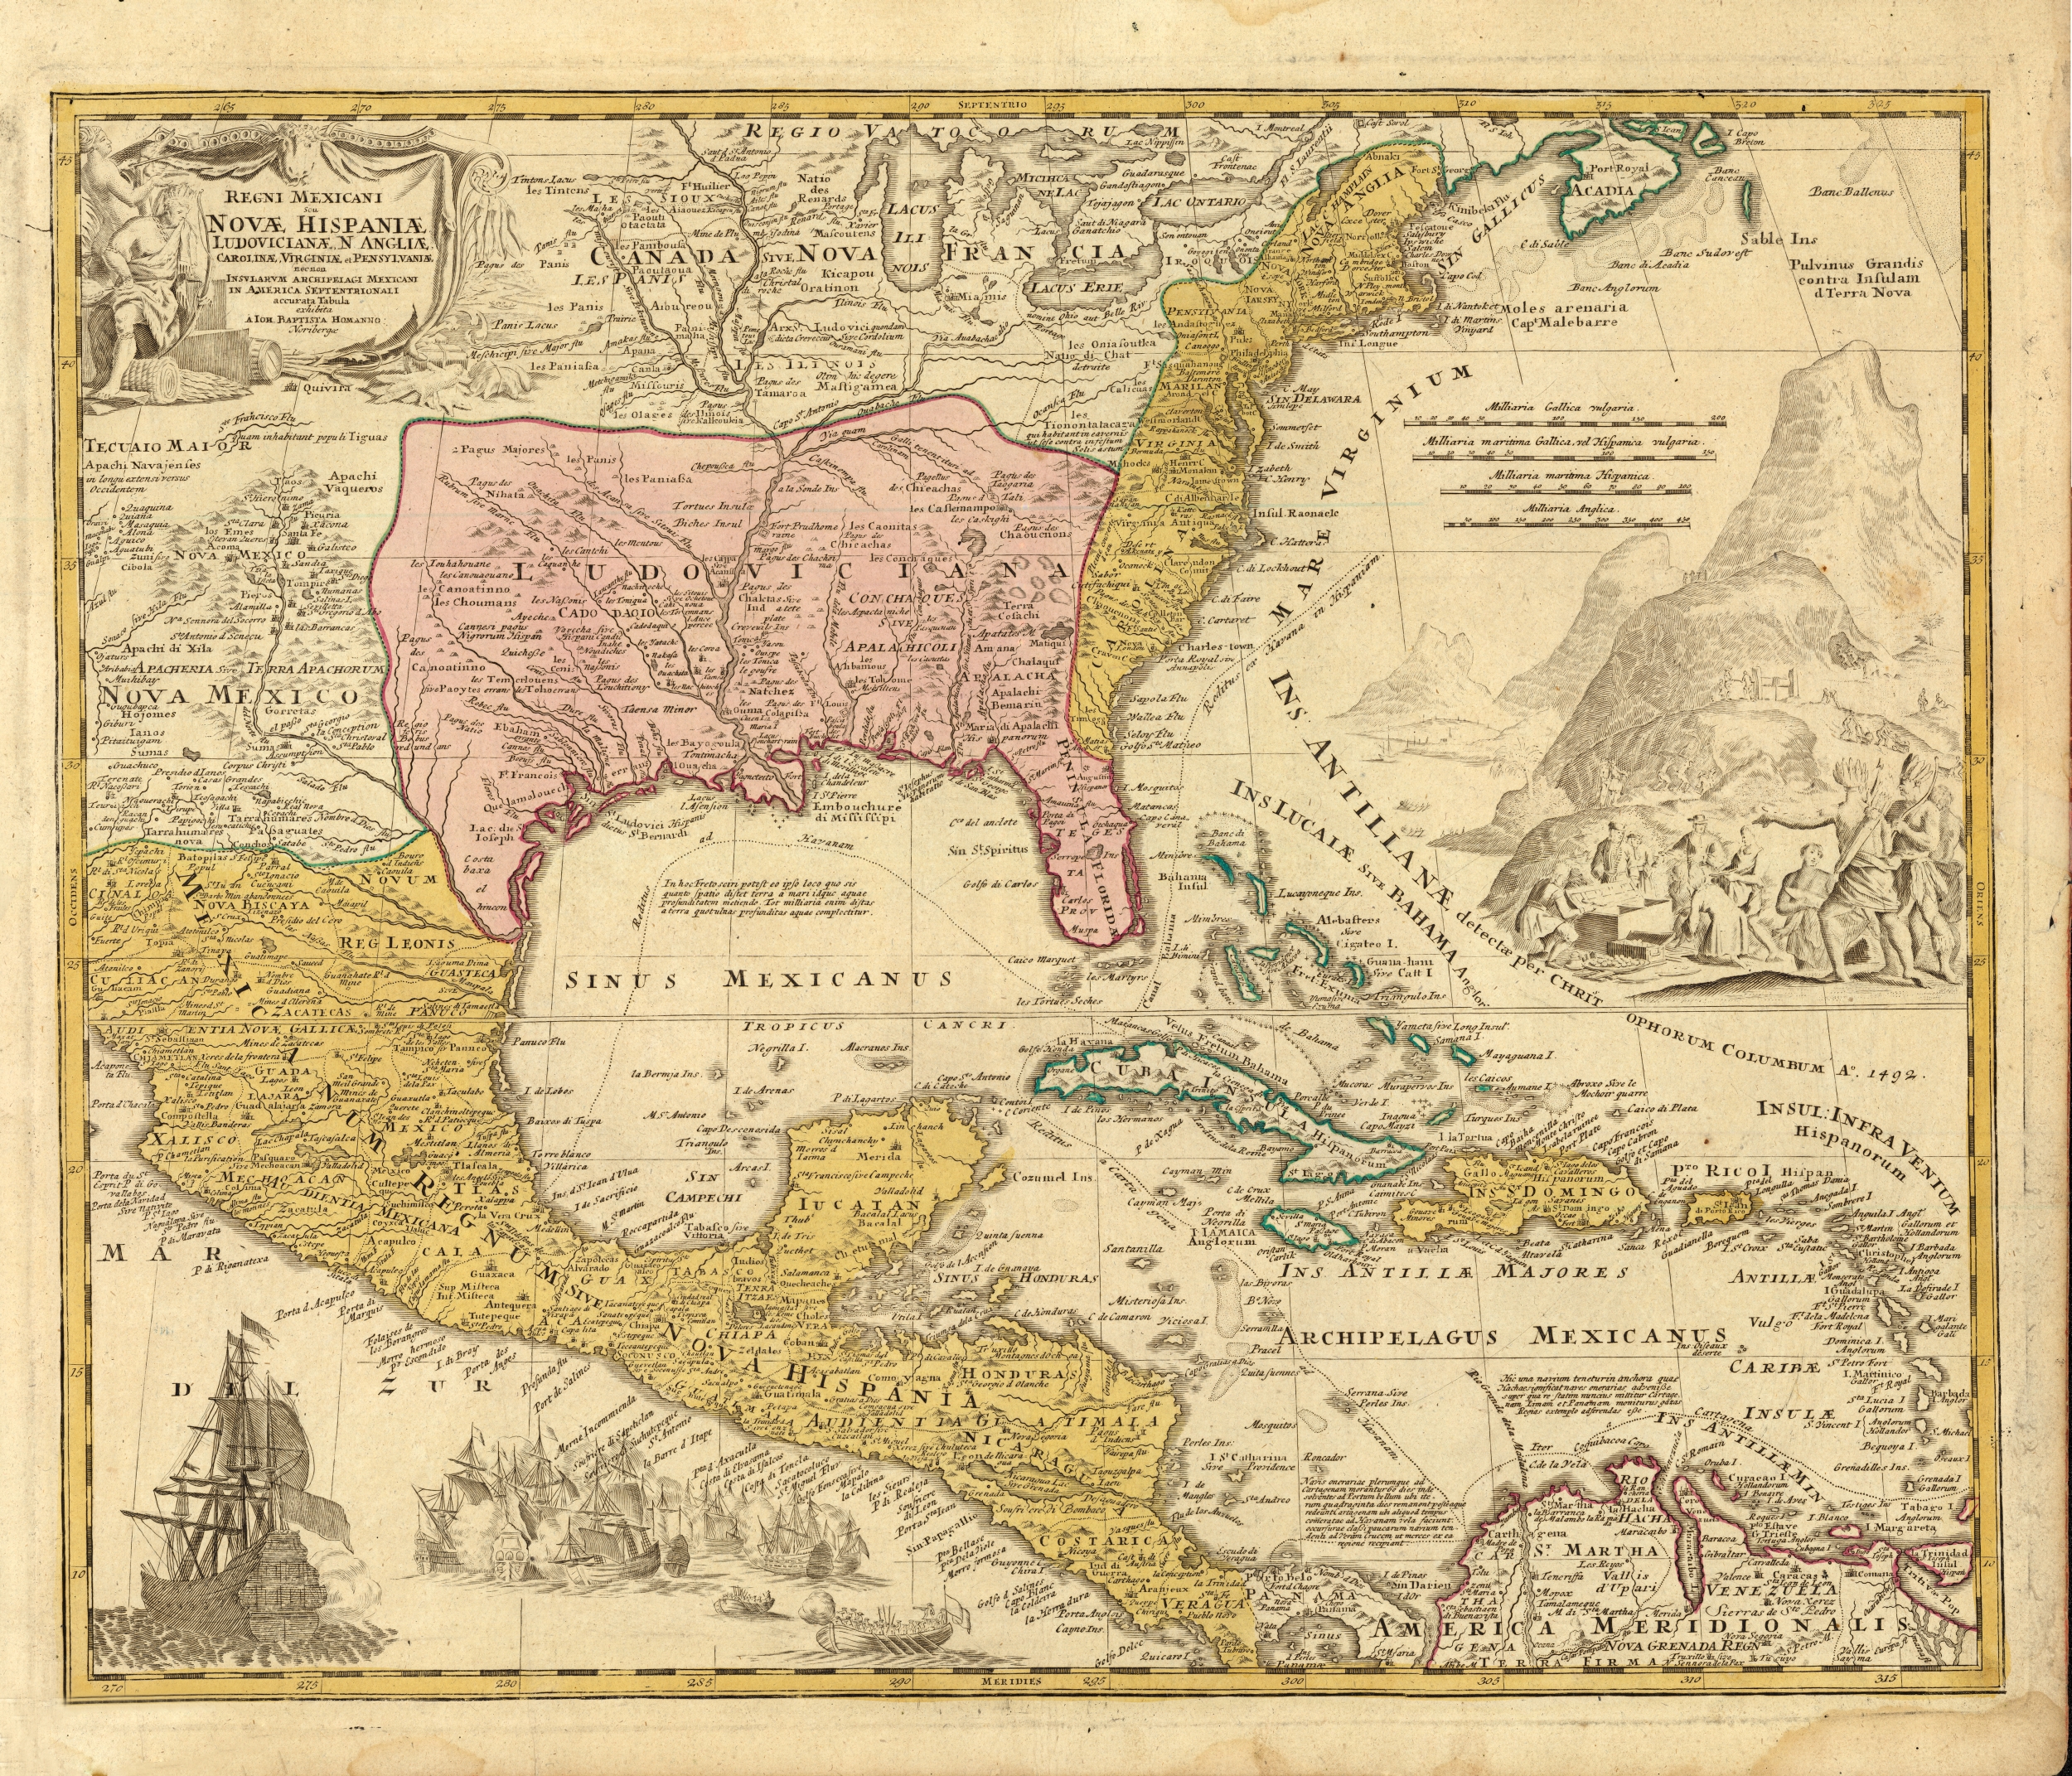 New Spain, English Colonies, and New France, 1712